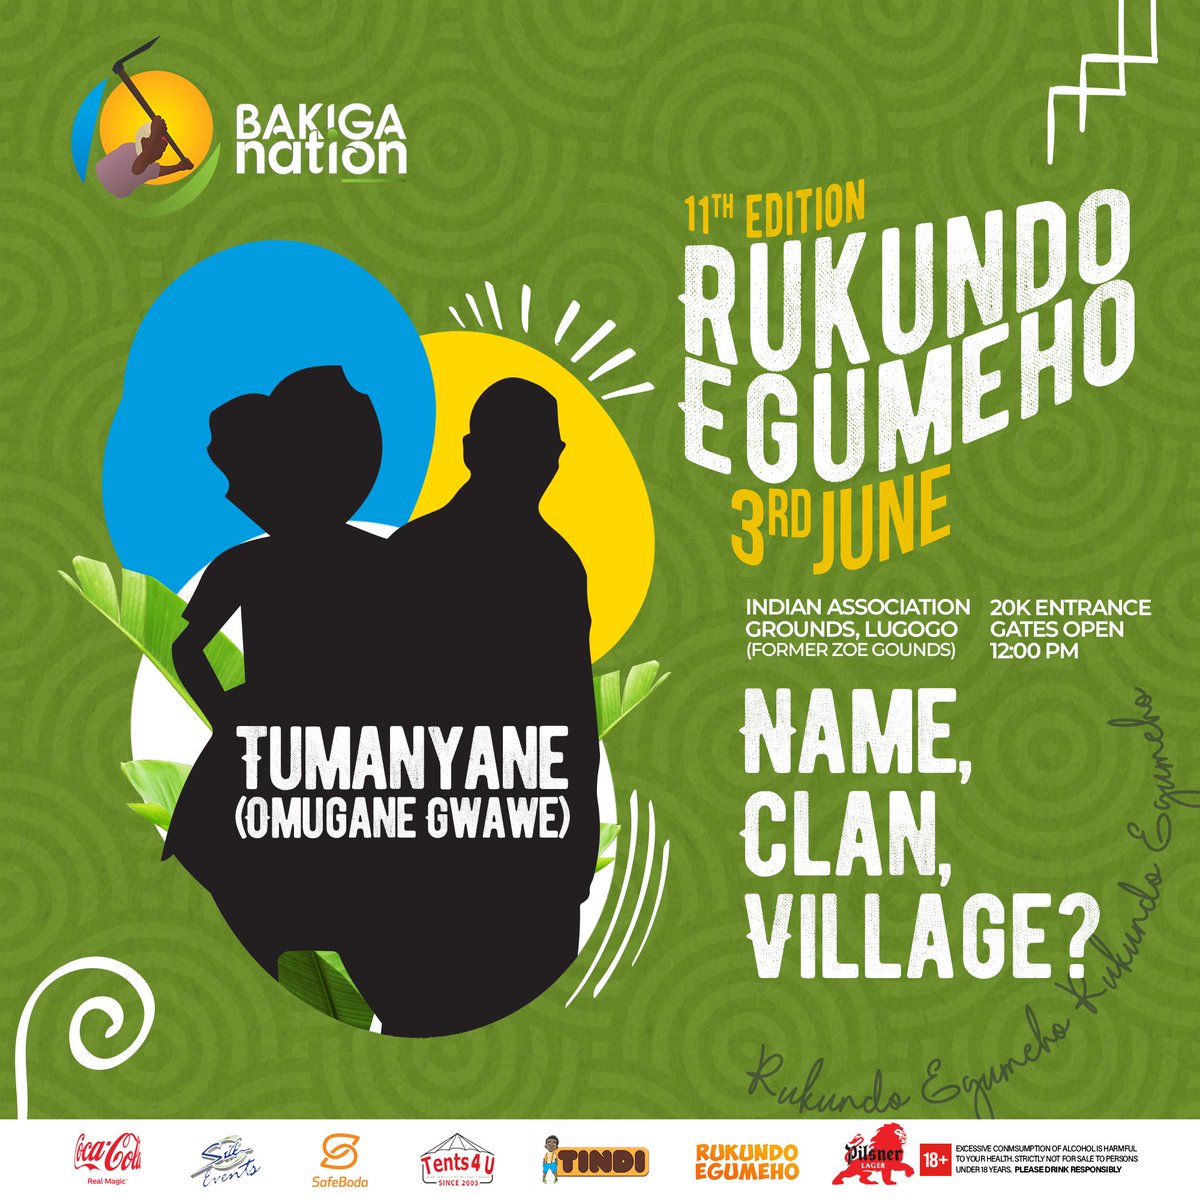 Tumanyane • niwe oha? 

Quote with your Name, Clan & Village. 

Tag your friends, let’s show our solidarity and love for each other. 

#MyStory #OmuganeGwawe 
#3rdJune • #11thEdition
#RukundoEgumeho11
#BakigaNation
#CelebrationOfOurCulture